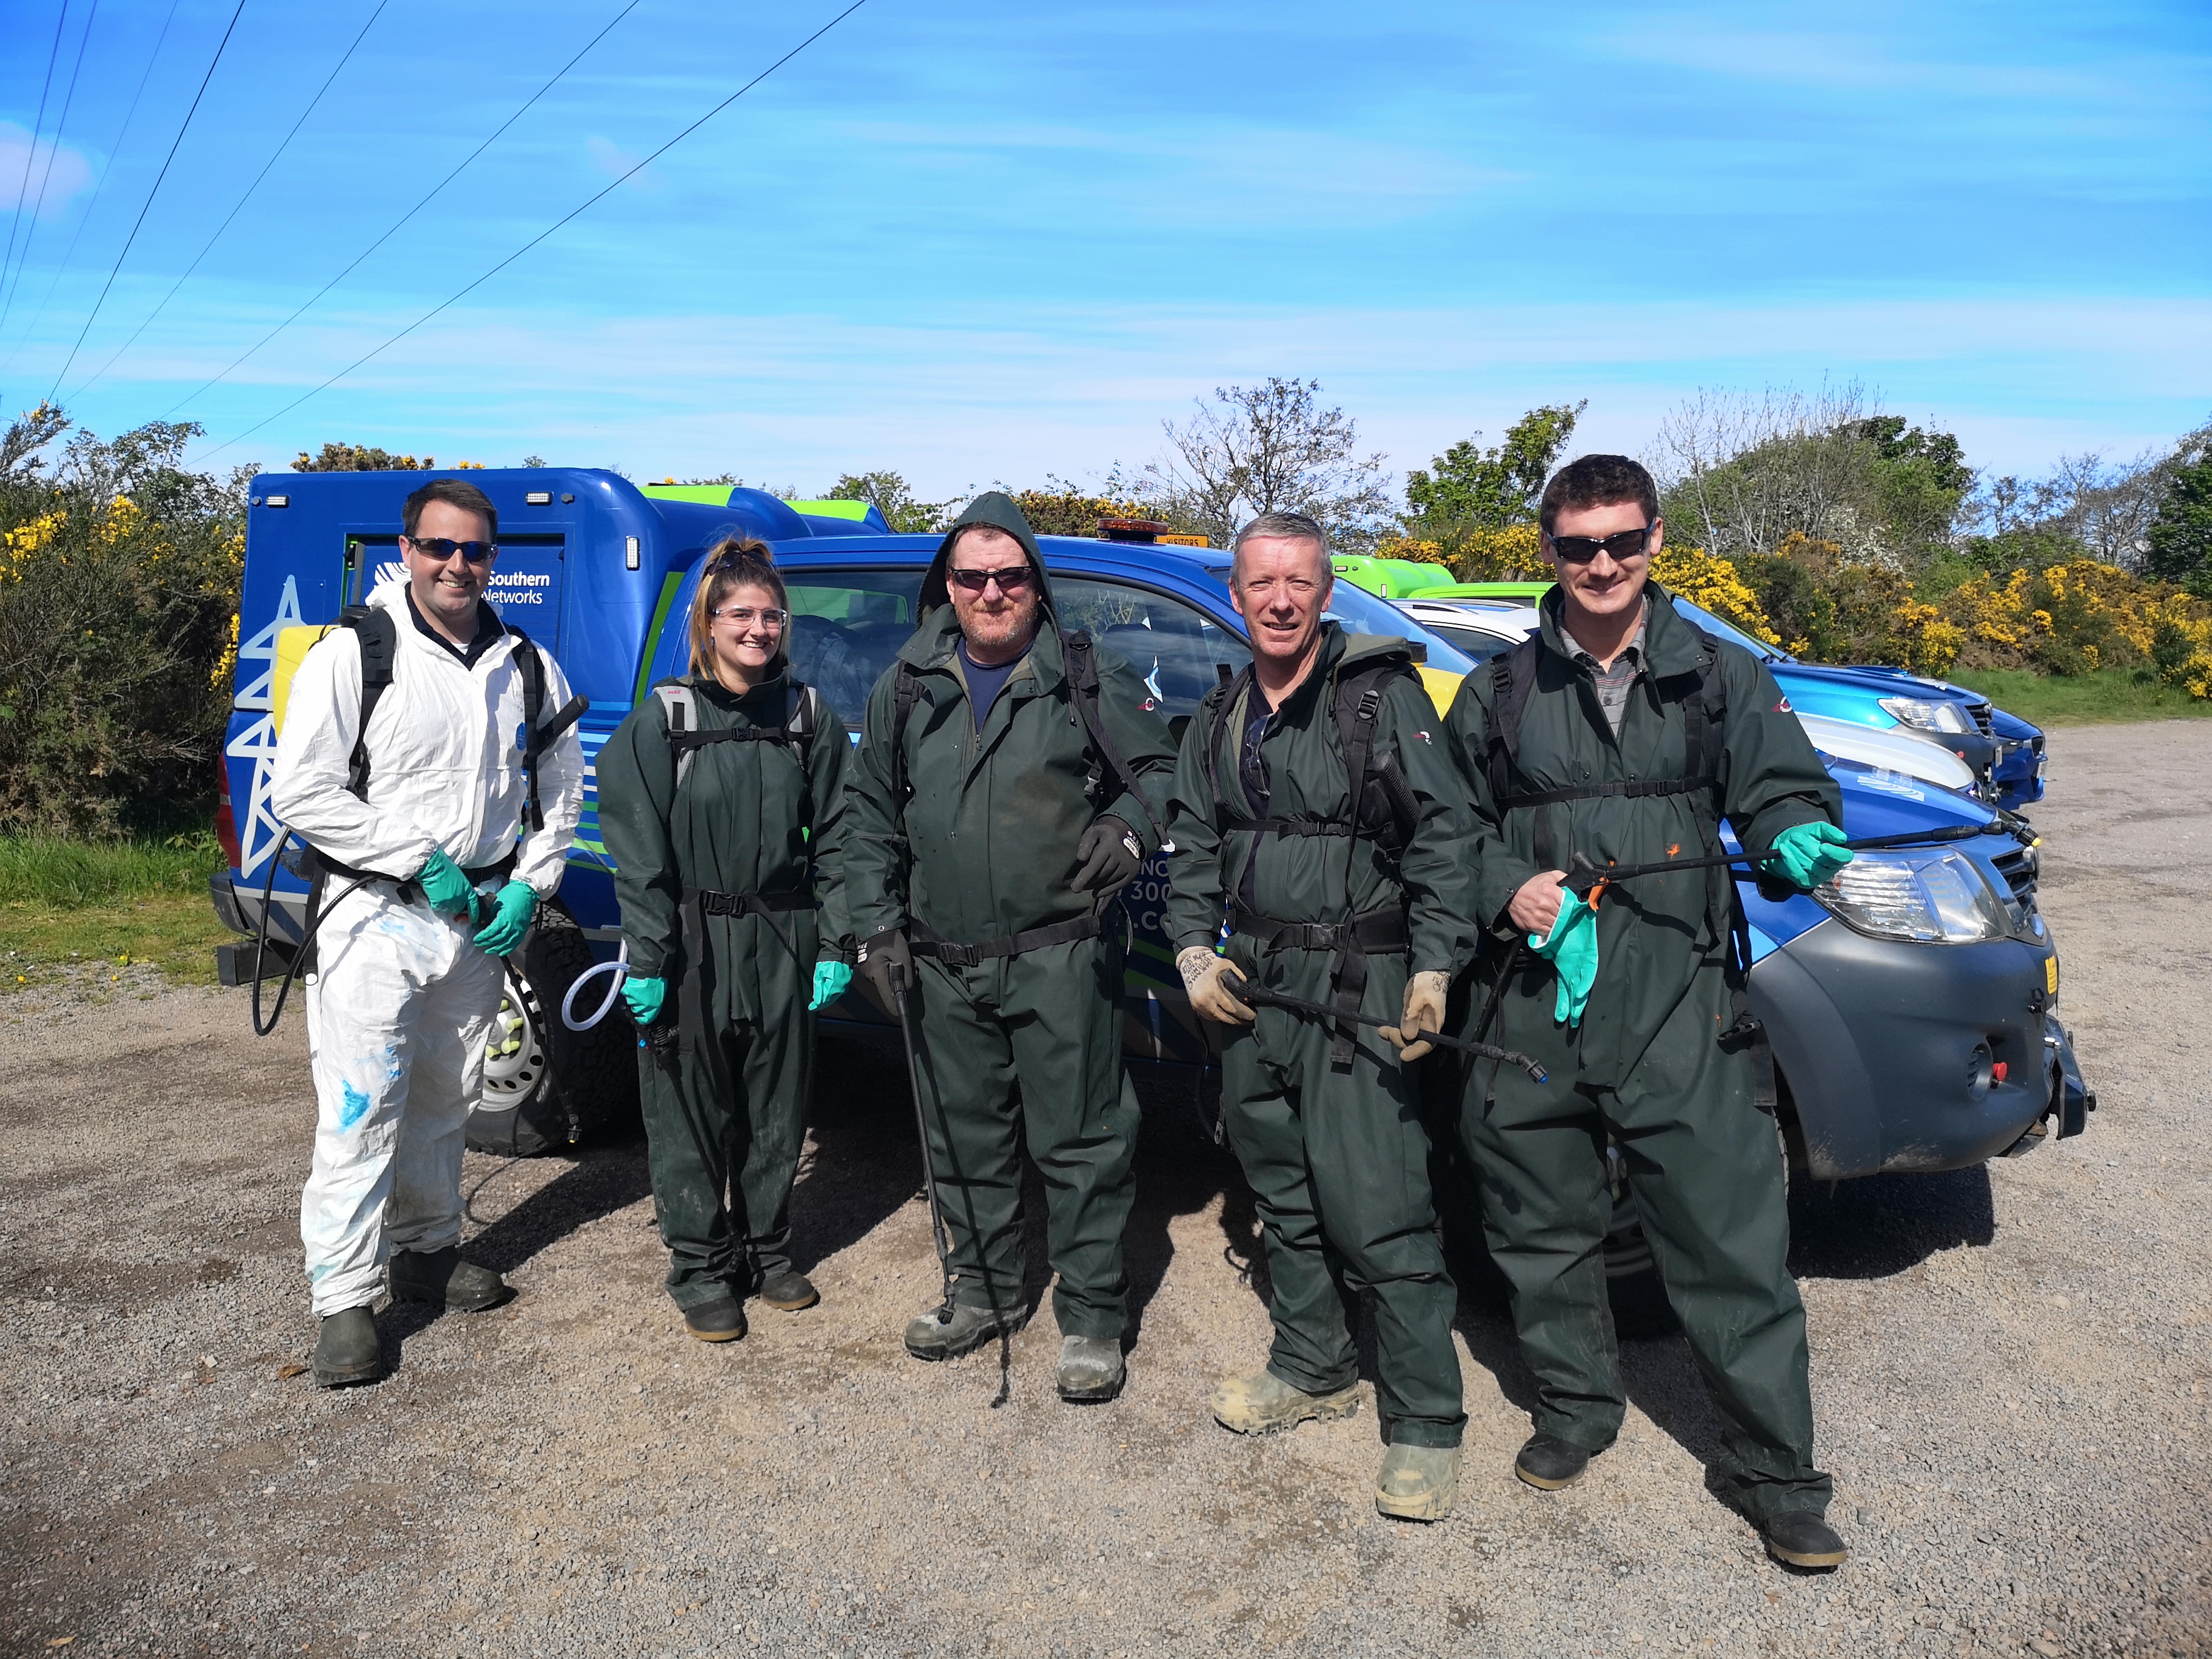 The crew from SSEN Transmission get ready to tackle the hogweed. Pictured: Michael Forrest,  Saffron Cruikshank, Iain Mackintosh, Mike Cowie and Dan Thomas.